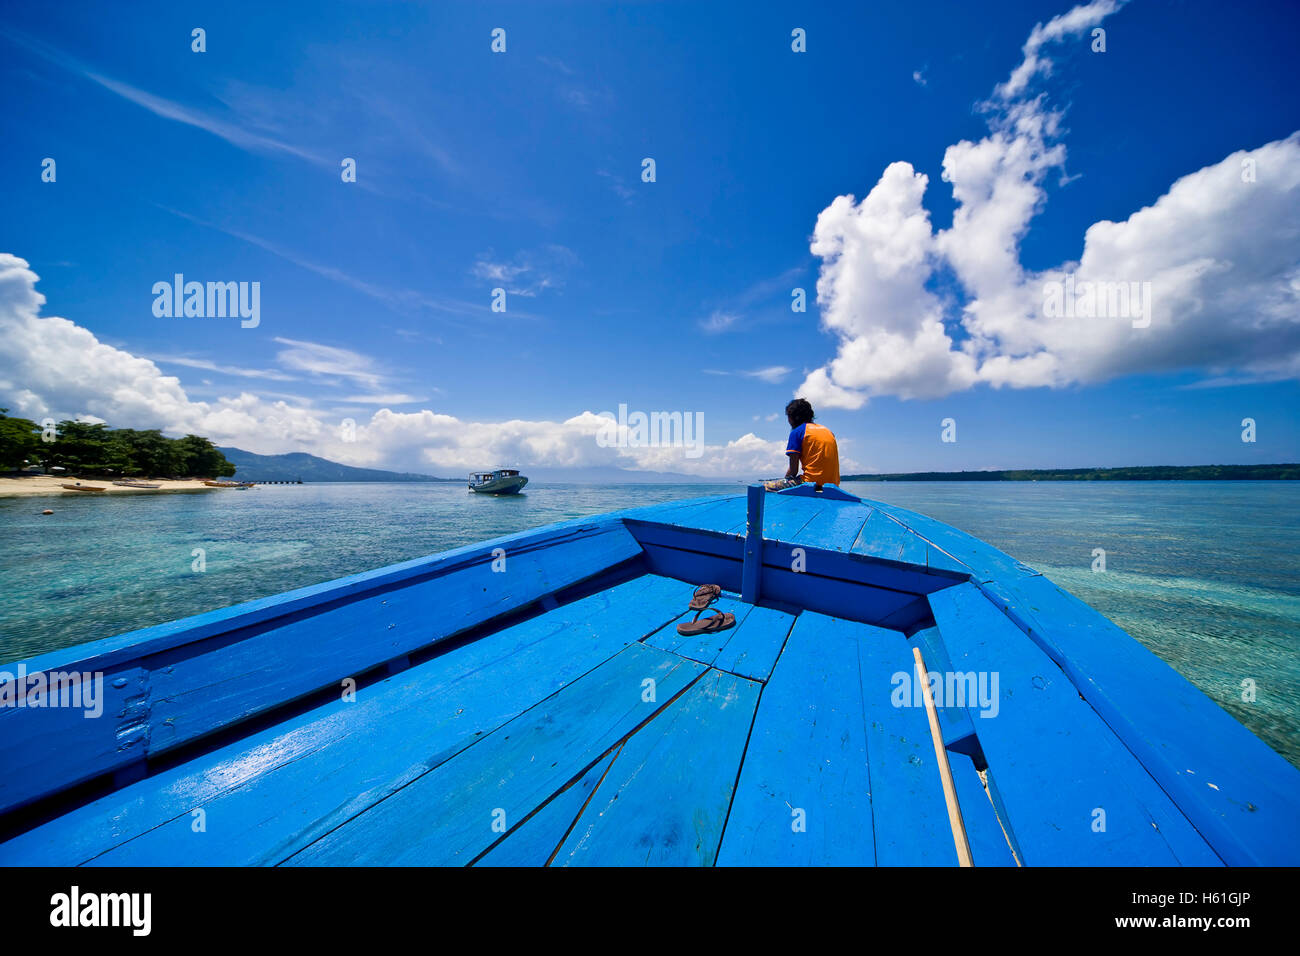 Young woman sitting at the bow of a wooden boat, Siladen island, Sulawesi, Indonesia, Southeast Asia Stock Photo